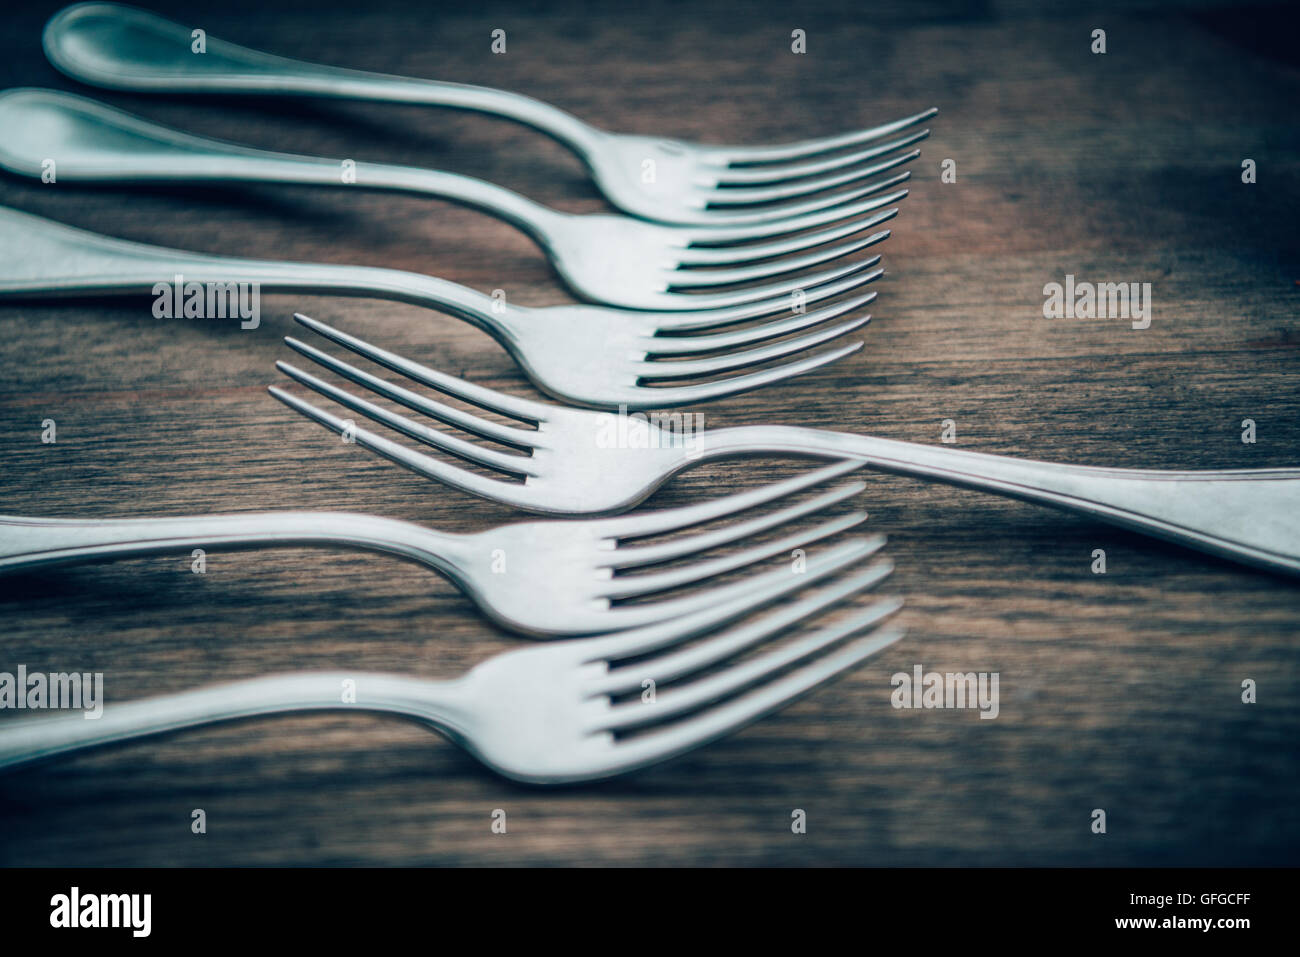 Forks arranged with one facing the opposite direction. Stock Photo